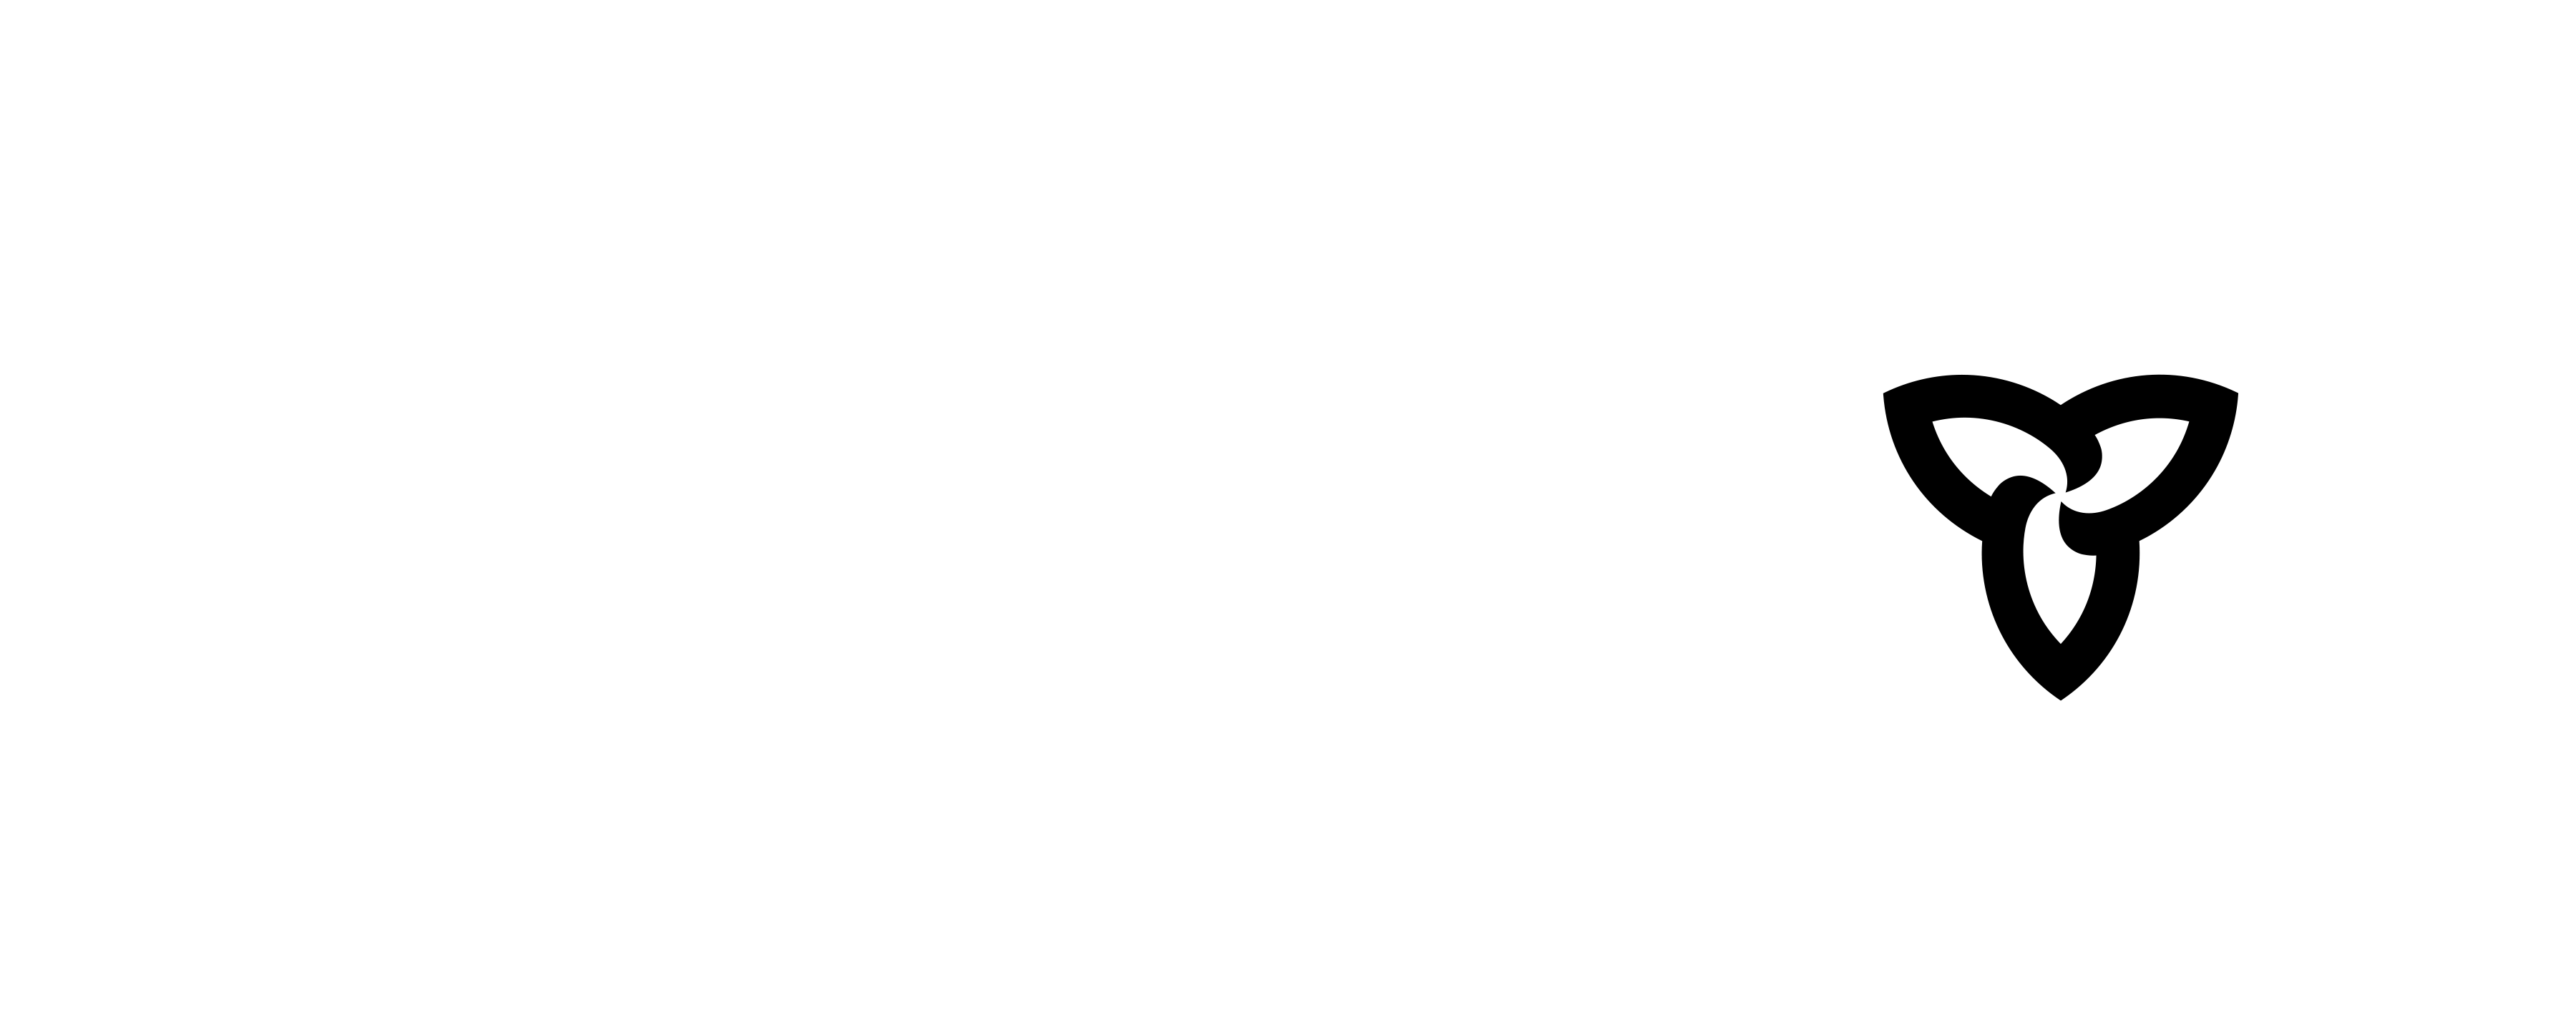 Province of Ontario